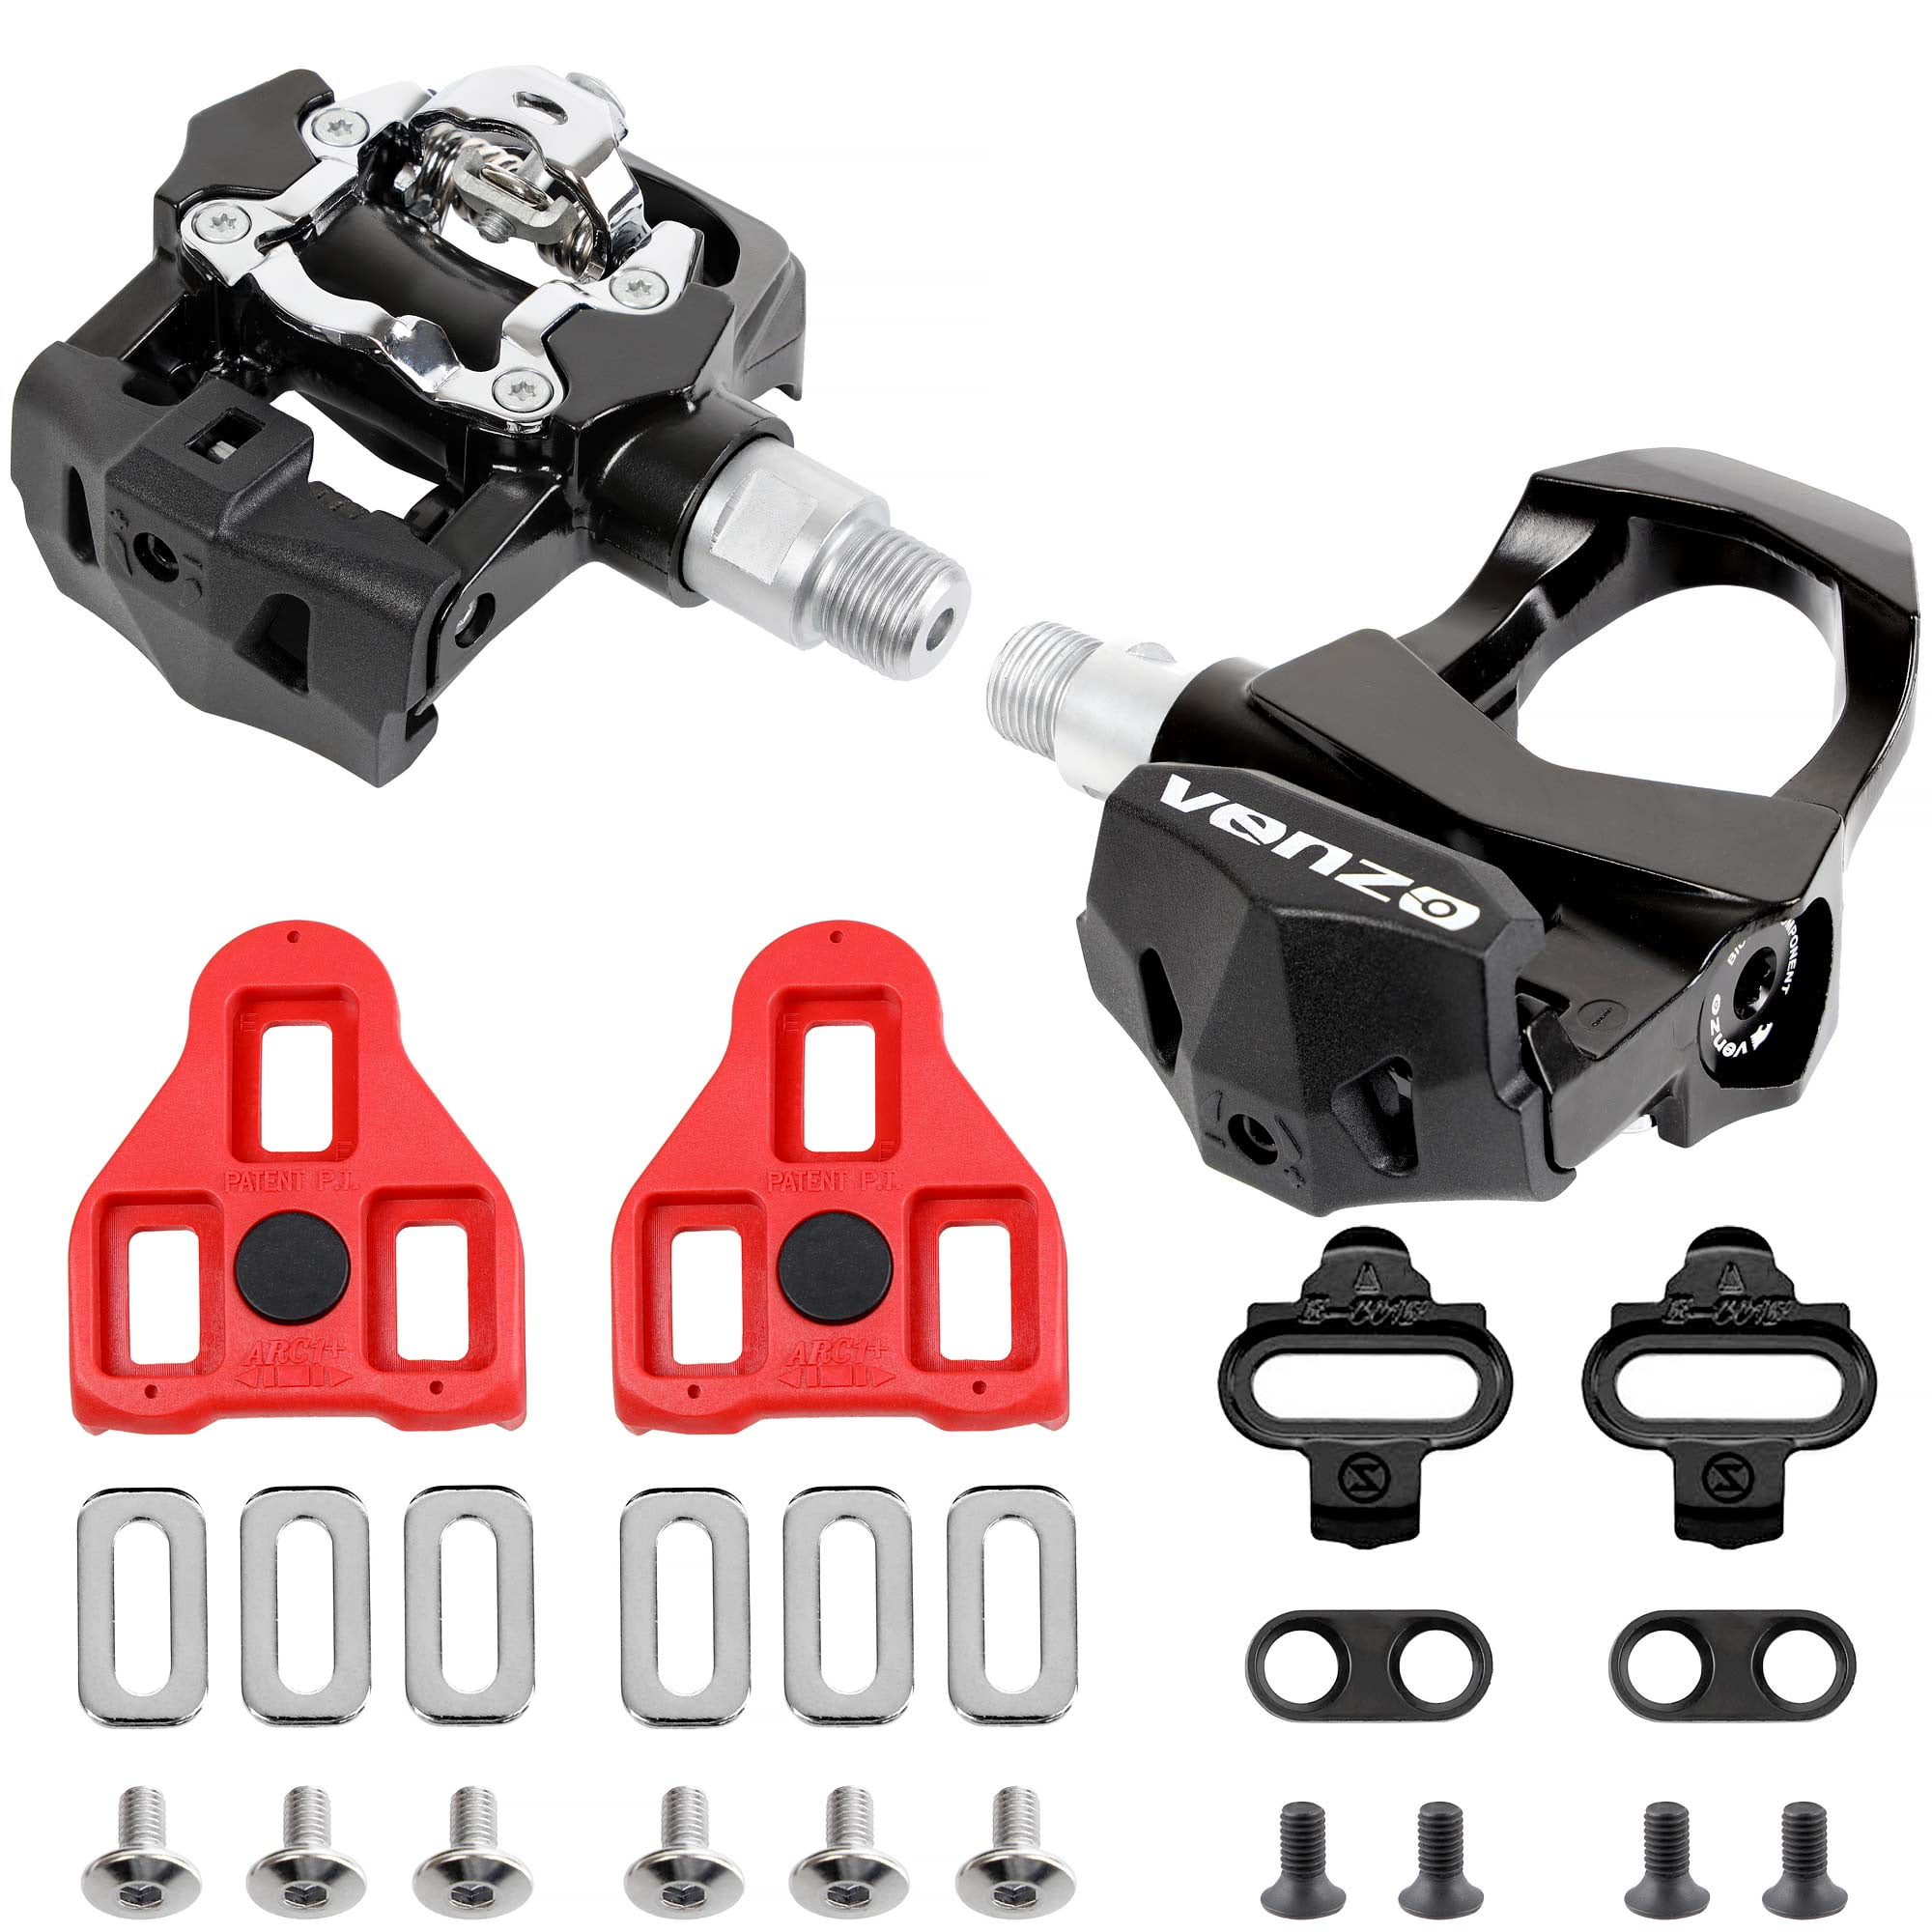 VENZO Multi-Use Shimano SPD Compatible MTB Bike Sealed Pedals 9/16" With Cleats 